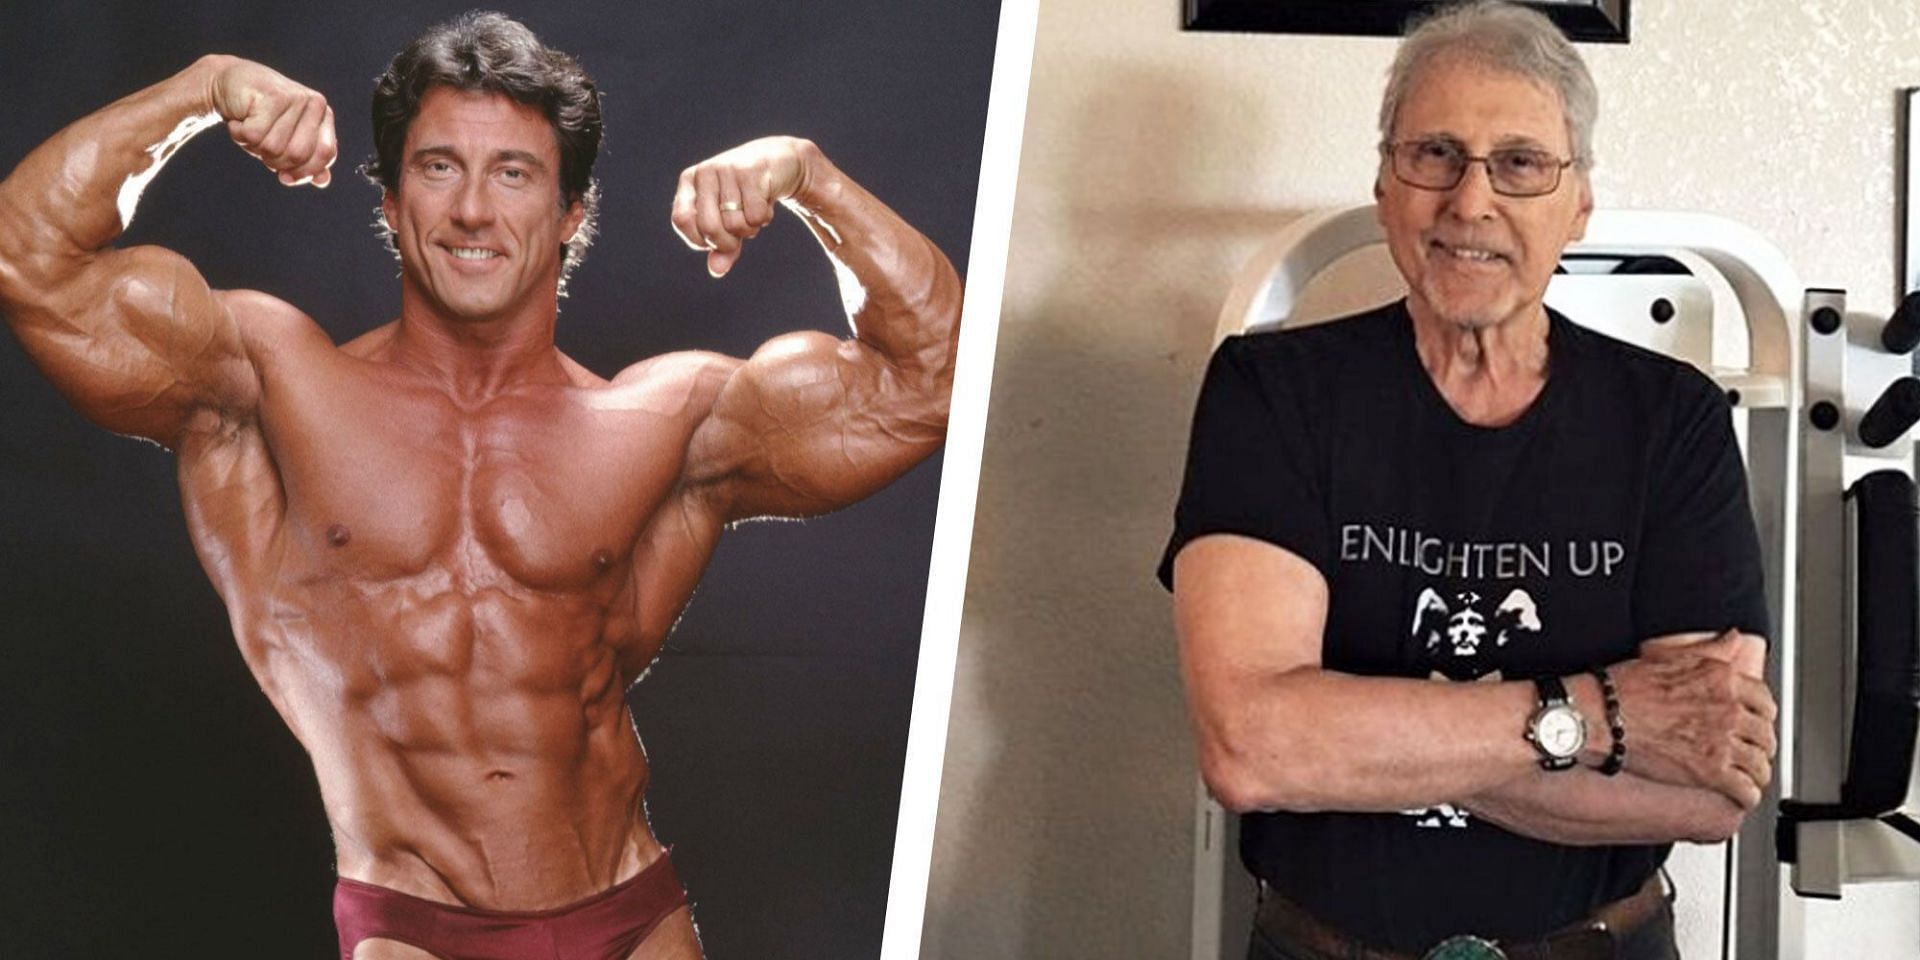 Here is how Frank Zane recovers after his workouts! (Image via Men